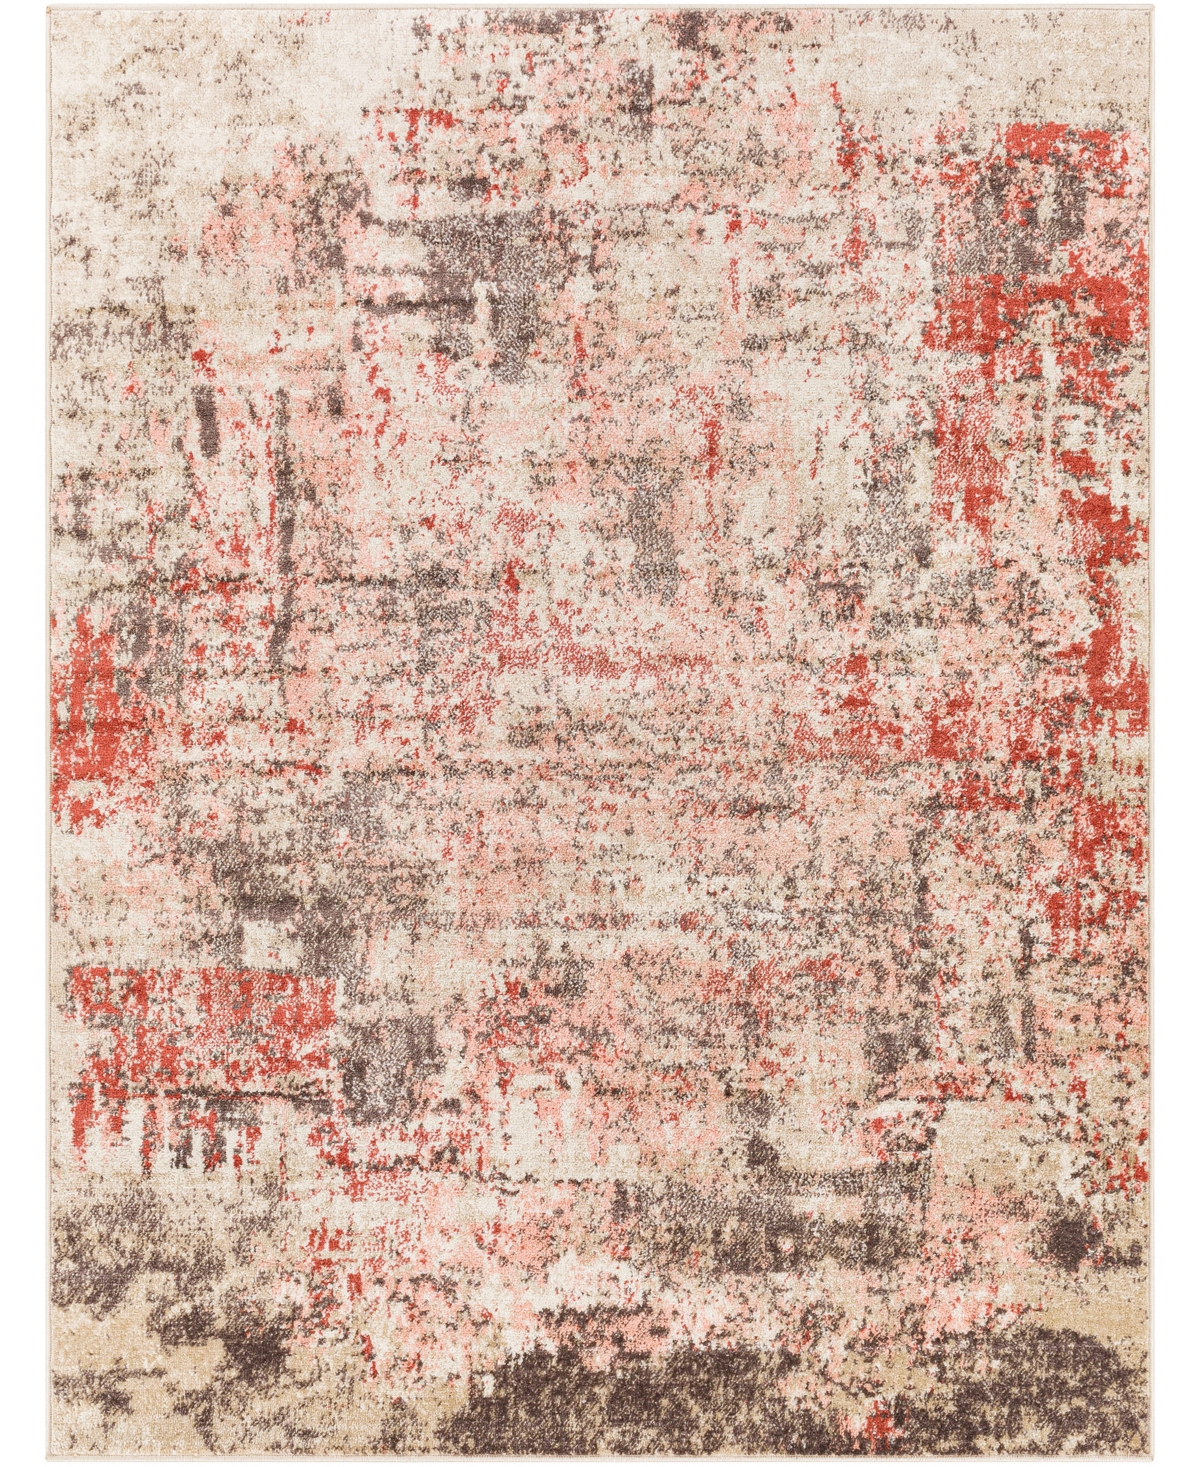 Abbie & Allie Rugs Anchor ANC2349 7'10in x 10'3in Area Rug - Red